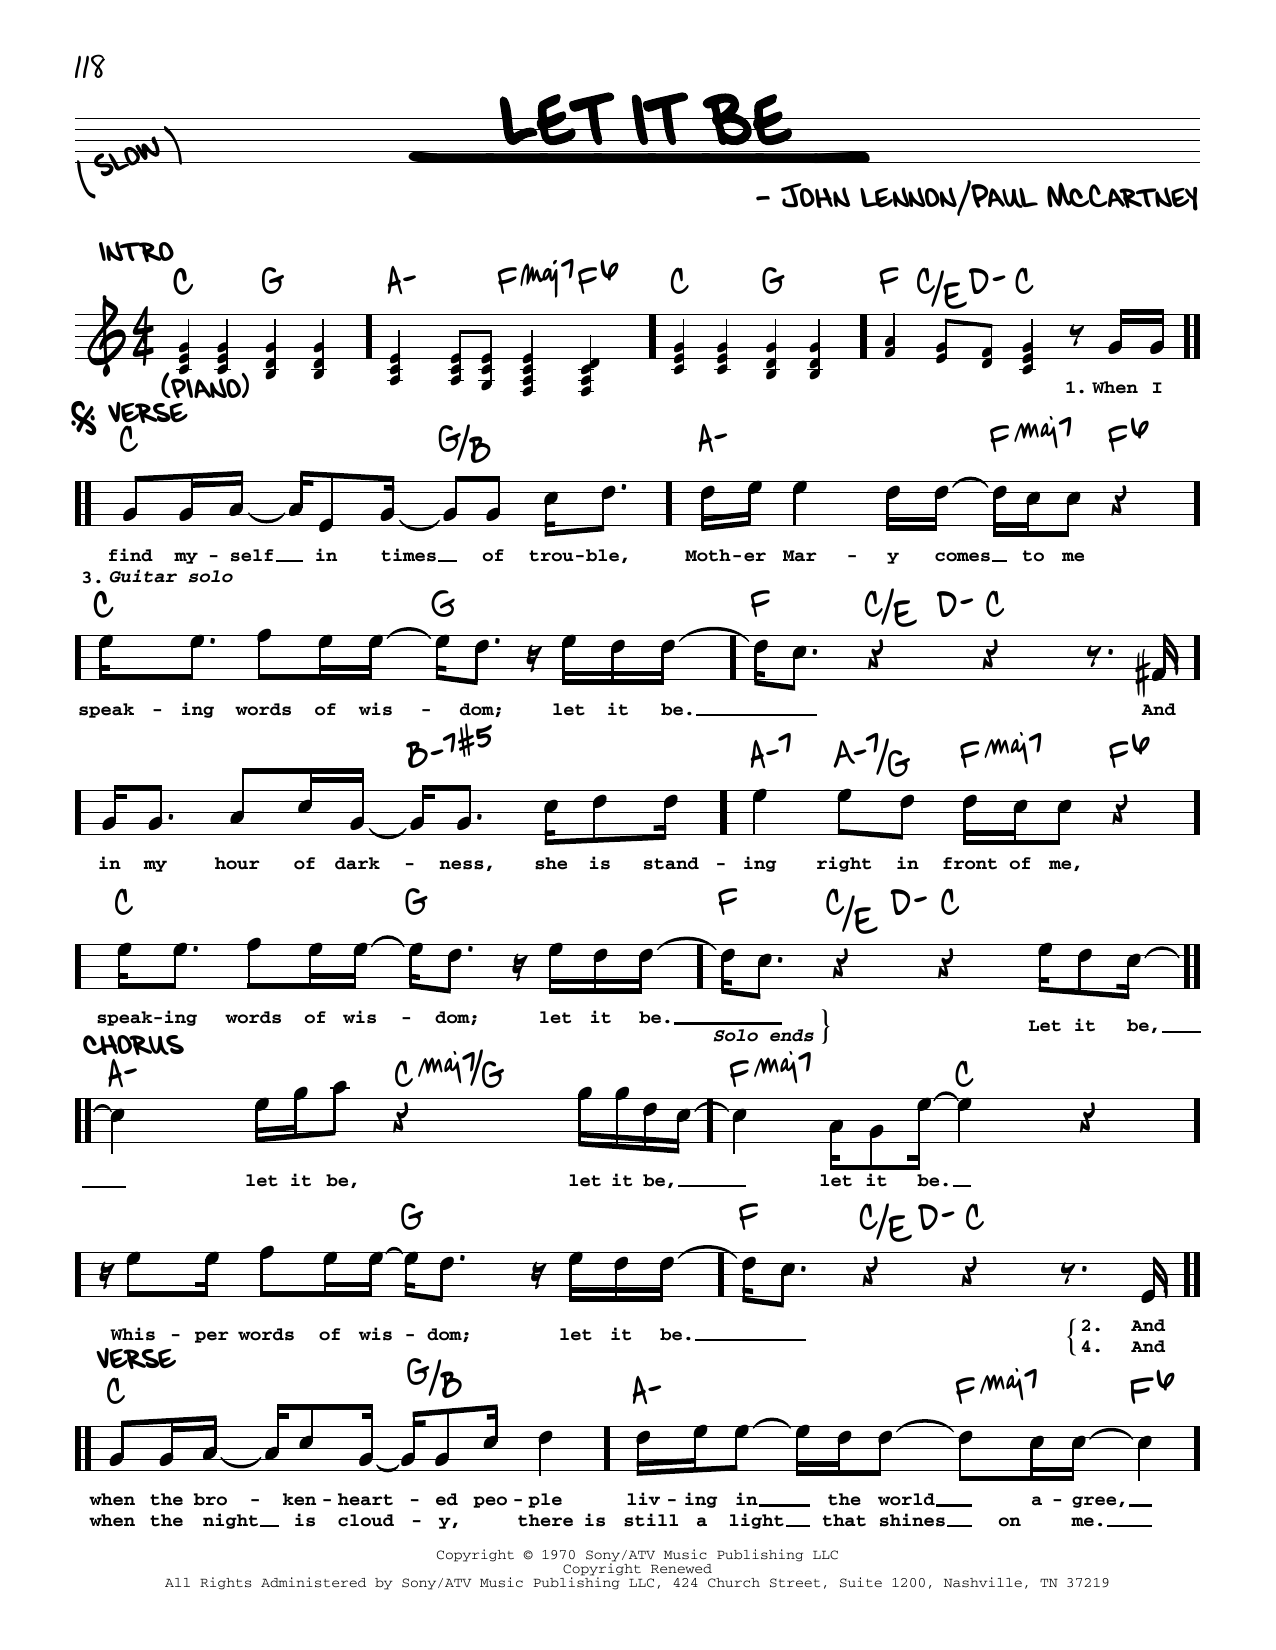 Download The Beatles Let It Be [Jazz version] Sheet Music